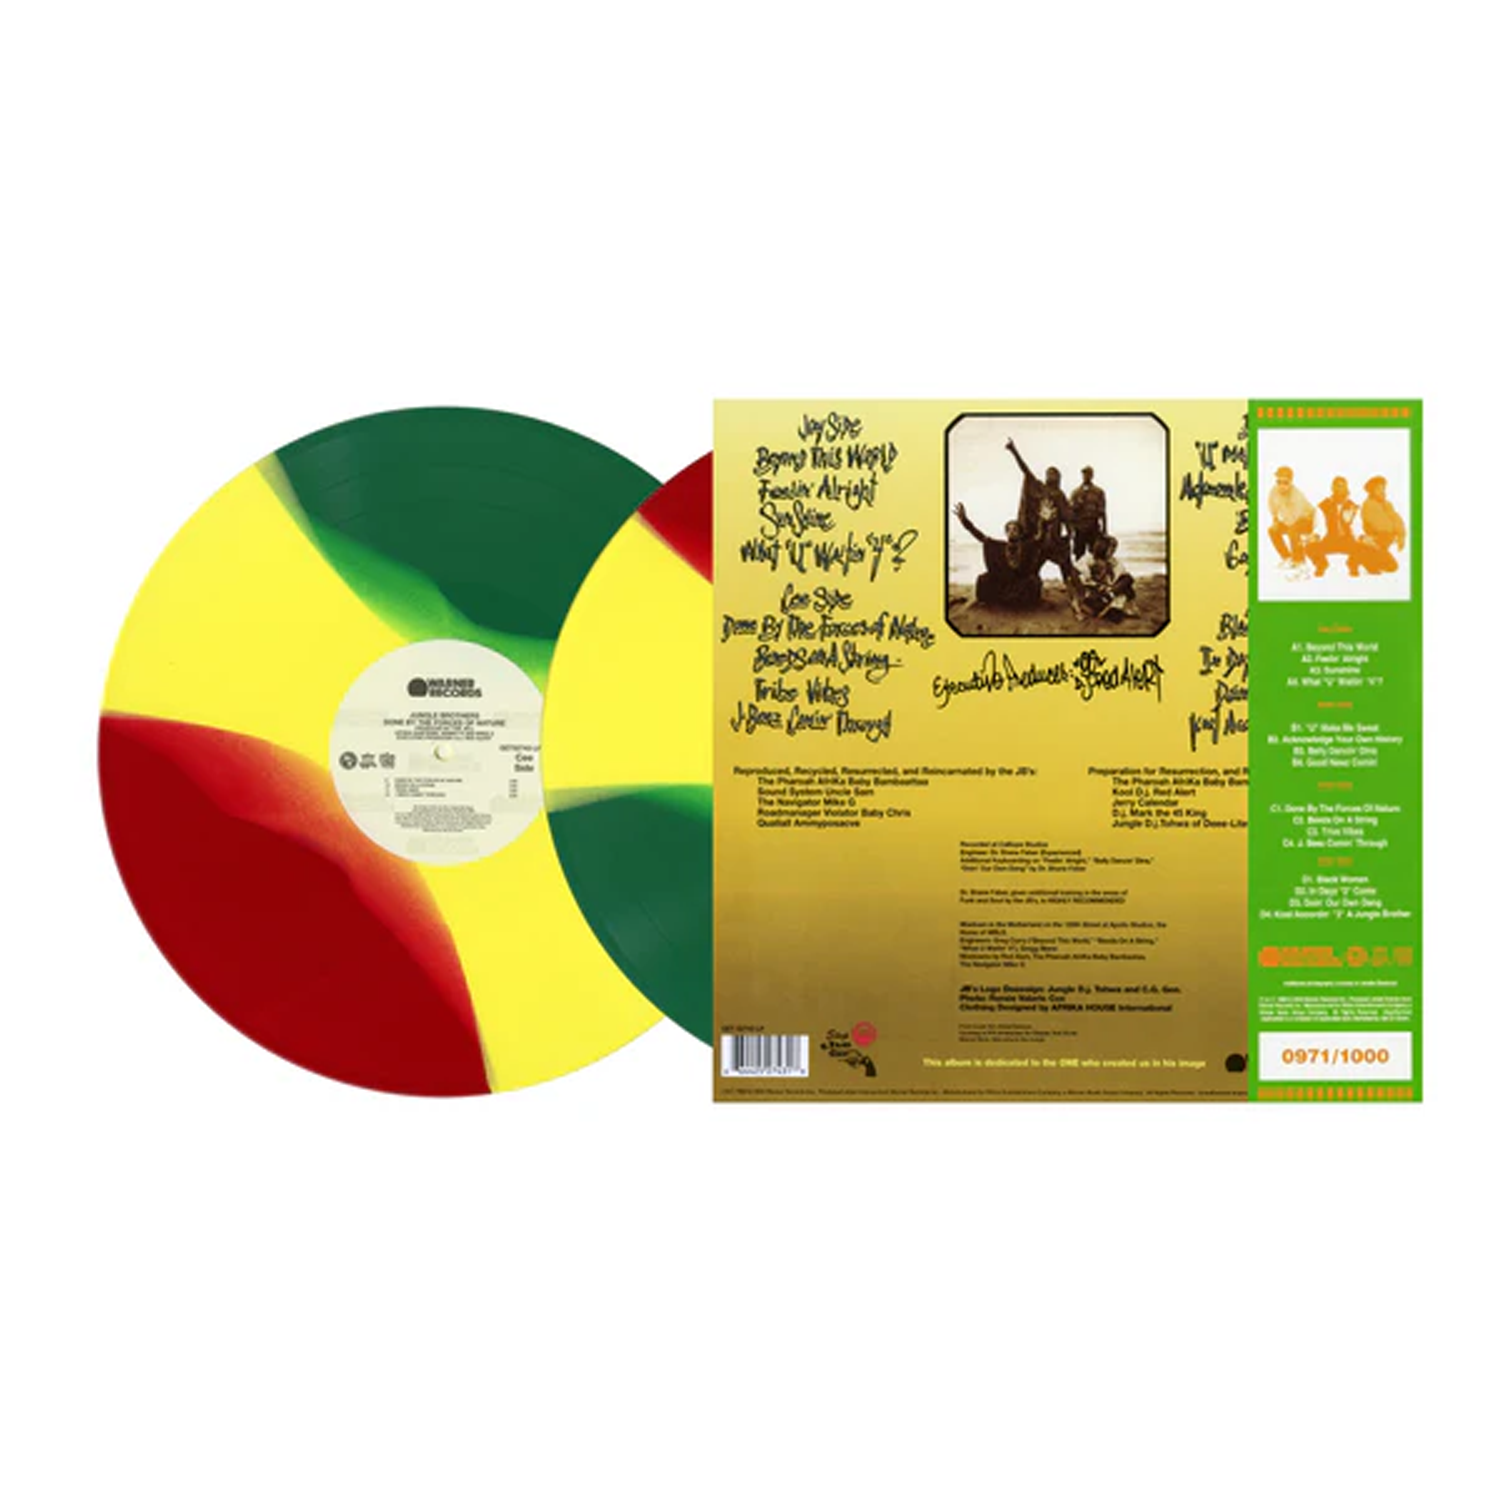 Jungle Brothers - Done By The Forces Of Nature: Limited Tri-Colour Vinyl 2LP